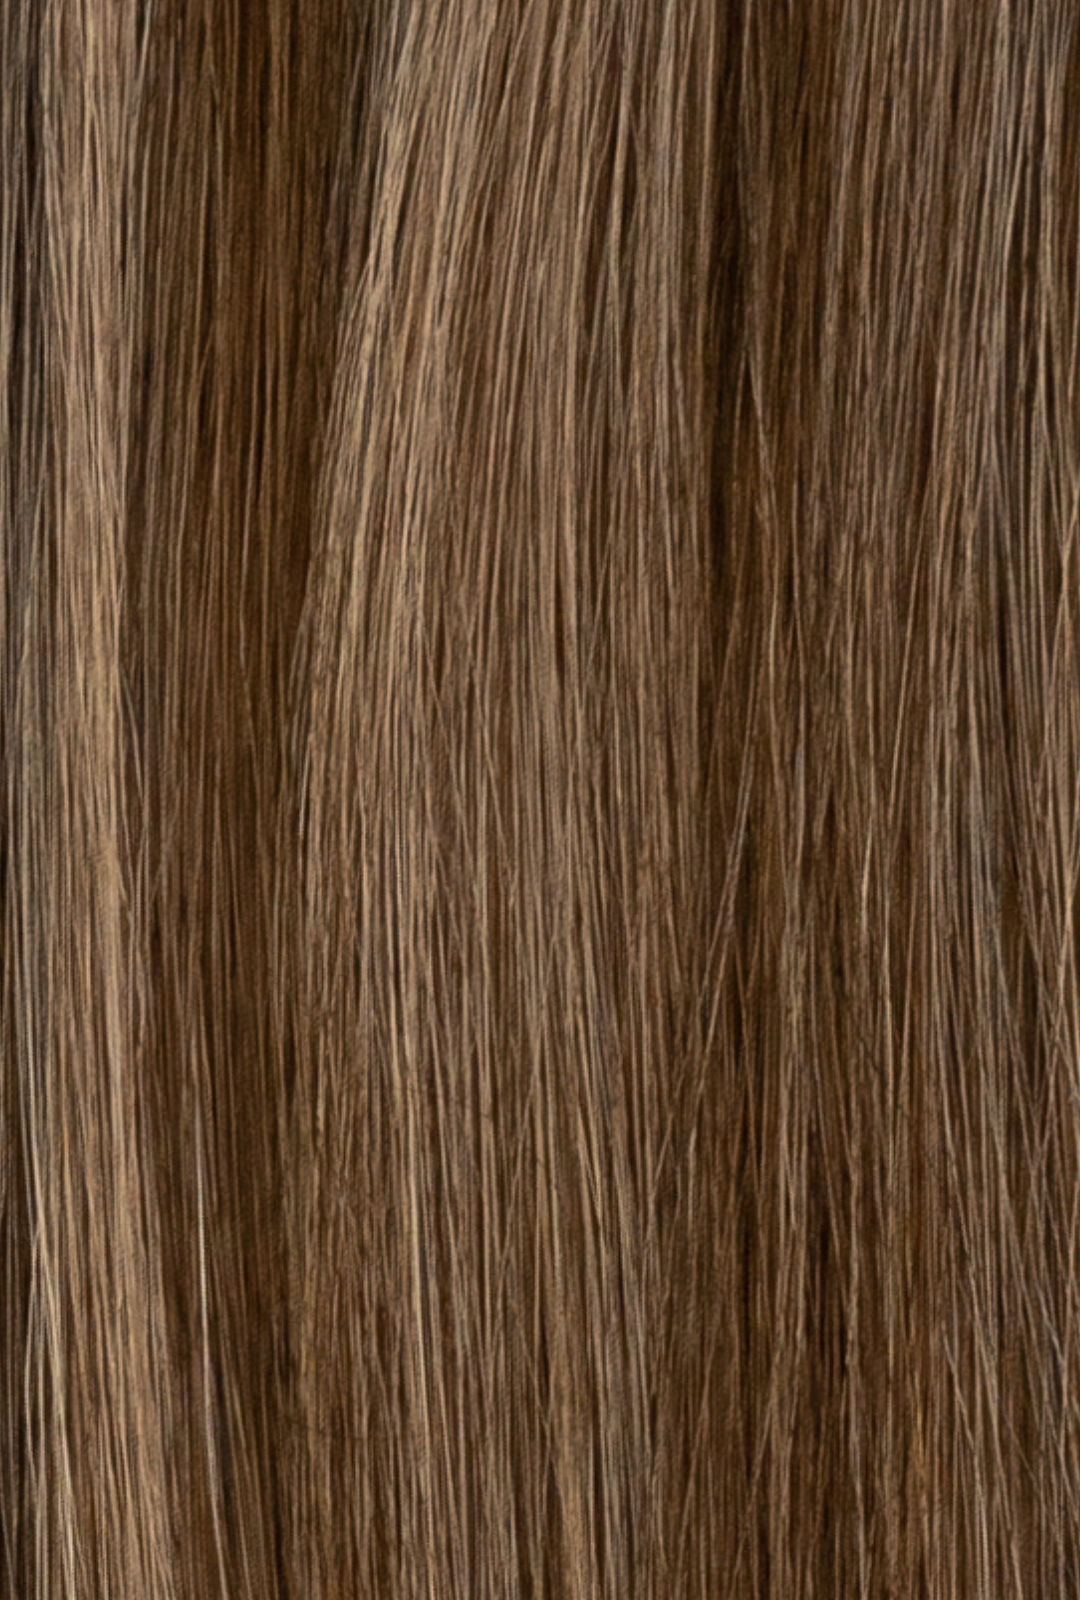 Laced Hair Hand Tied Weft Extensions Dimensional #4/8 (Cappuccino)